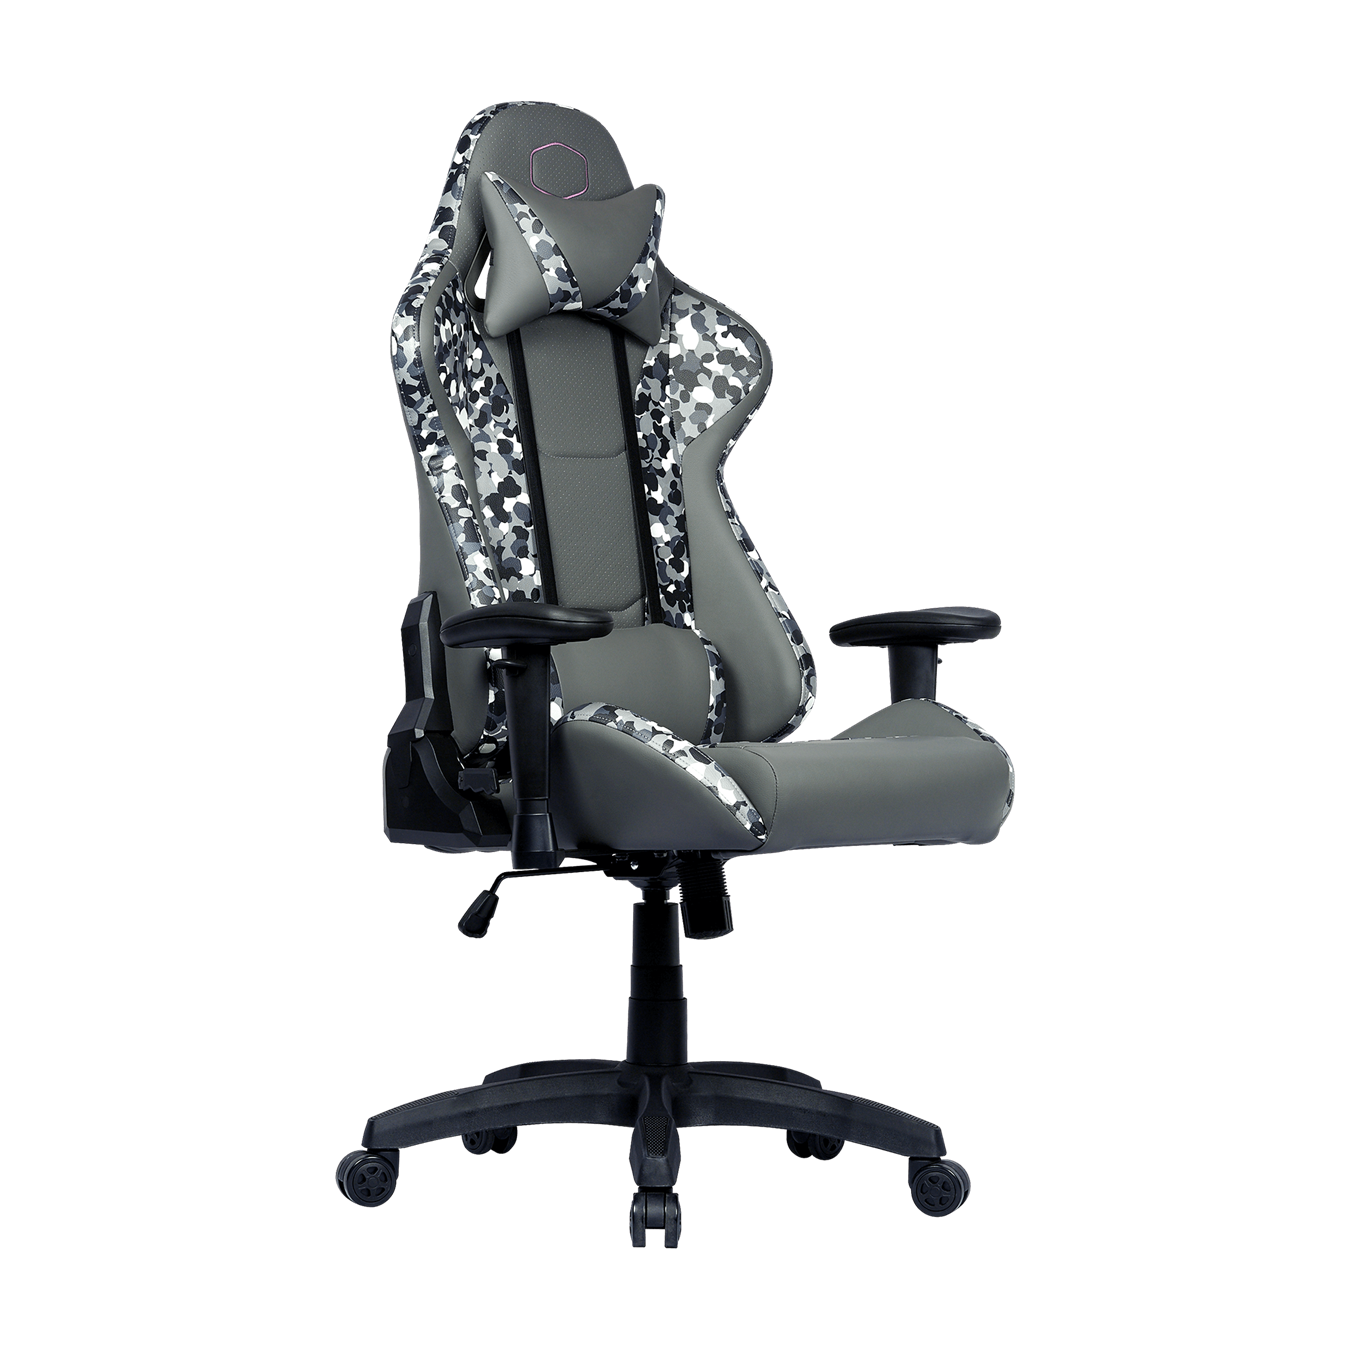 Caliber R1S Dark Knight CAMO Gaming Chair - 45 degree angle view